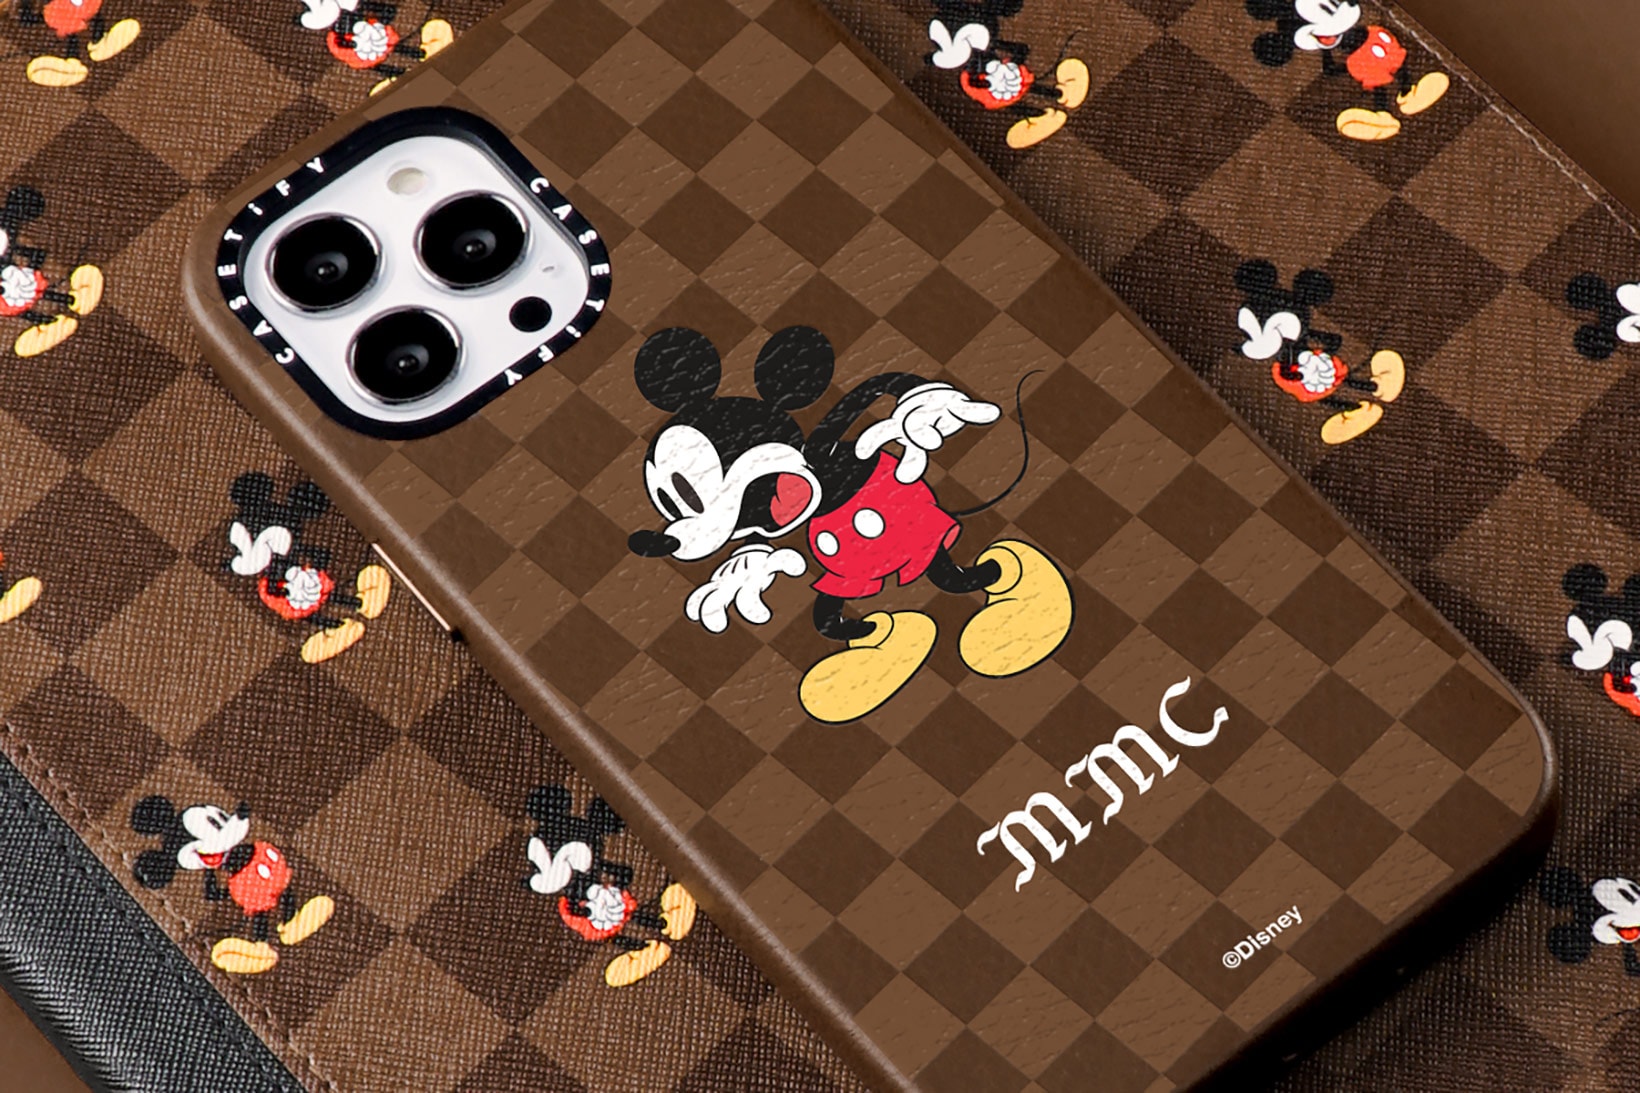 casetify disney mickey mouse collaboration phone cases apple iphone ipad